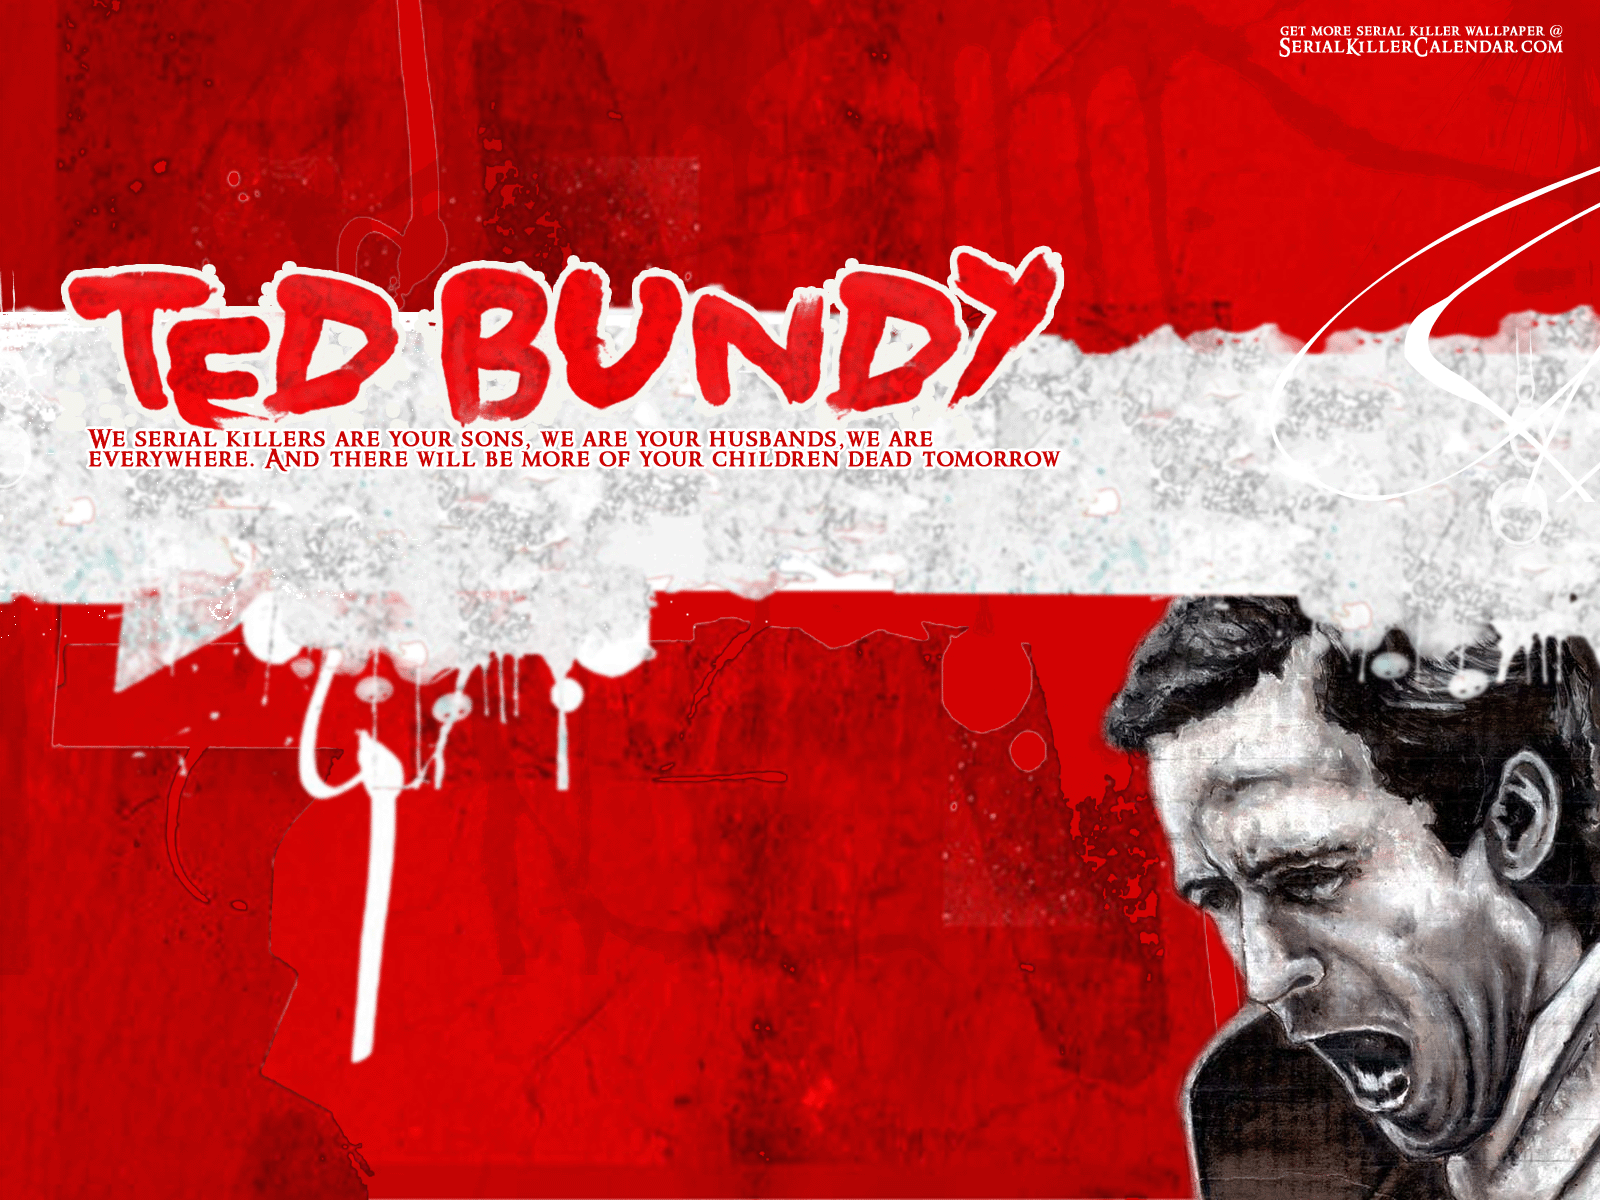 Ted Bundy Wallpapers